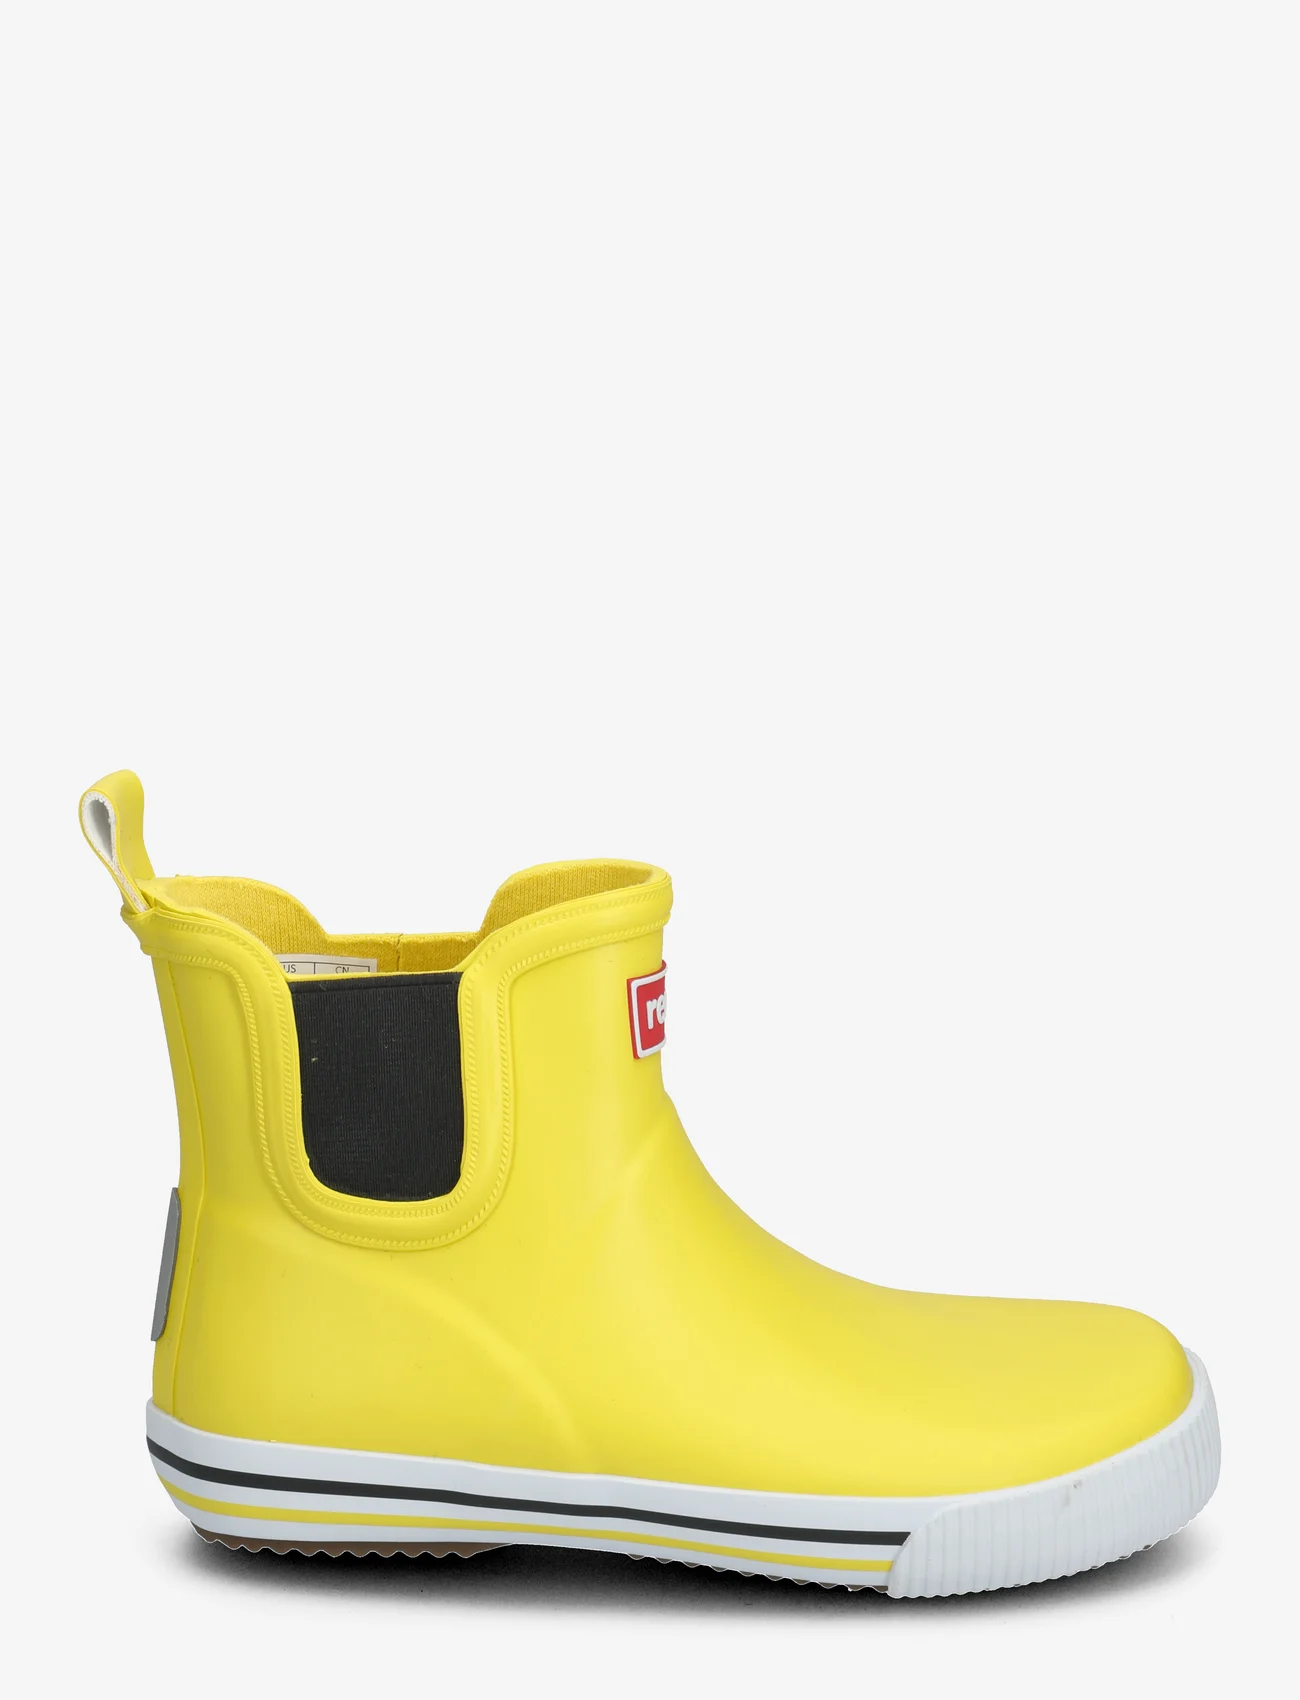 Reima - Rain boots, Ankles - unlined rubberboots - yellow - 1